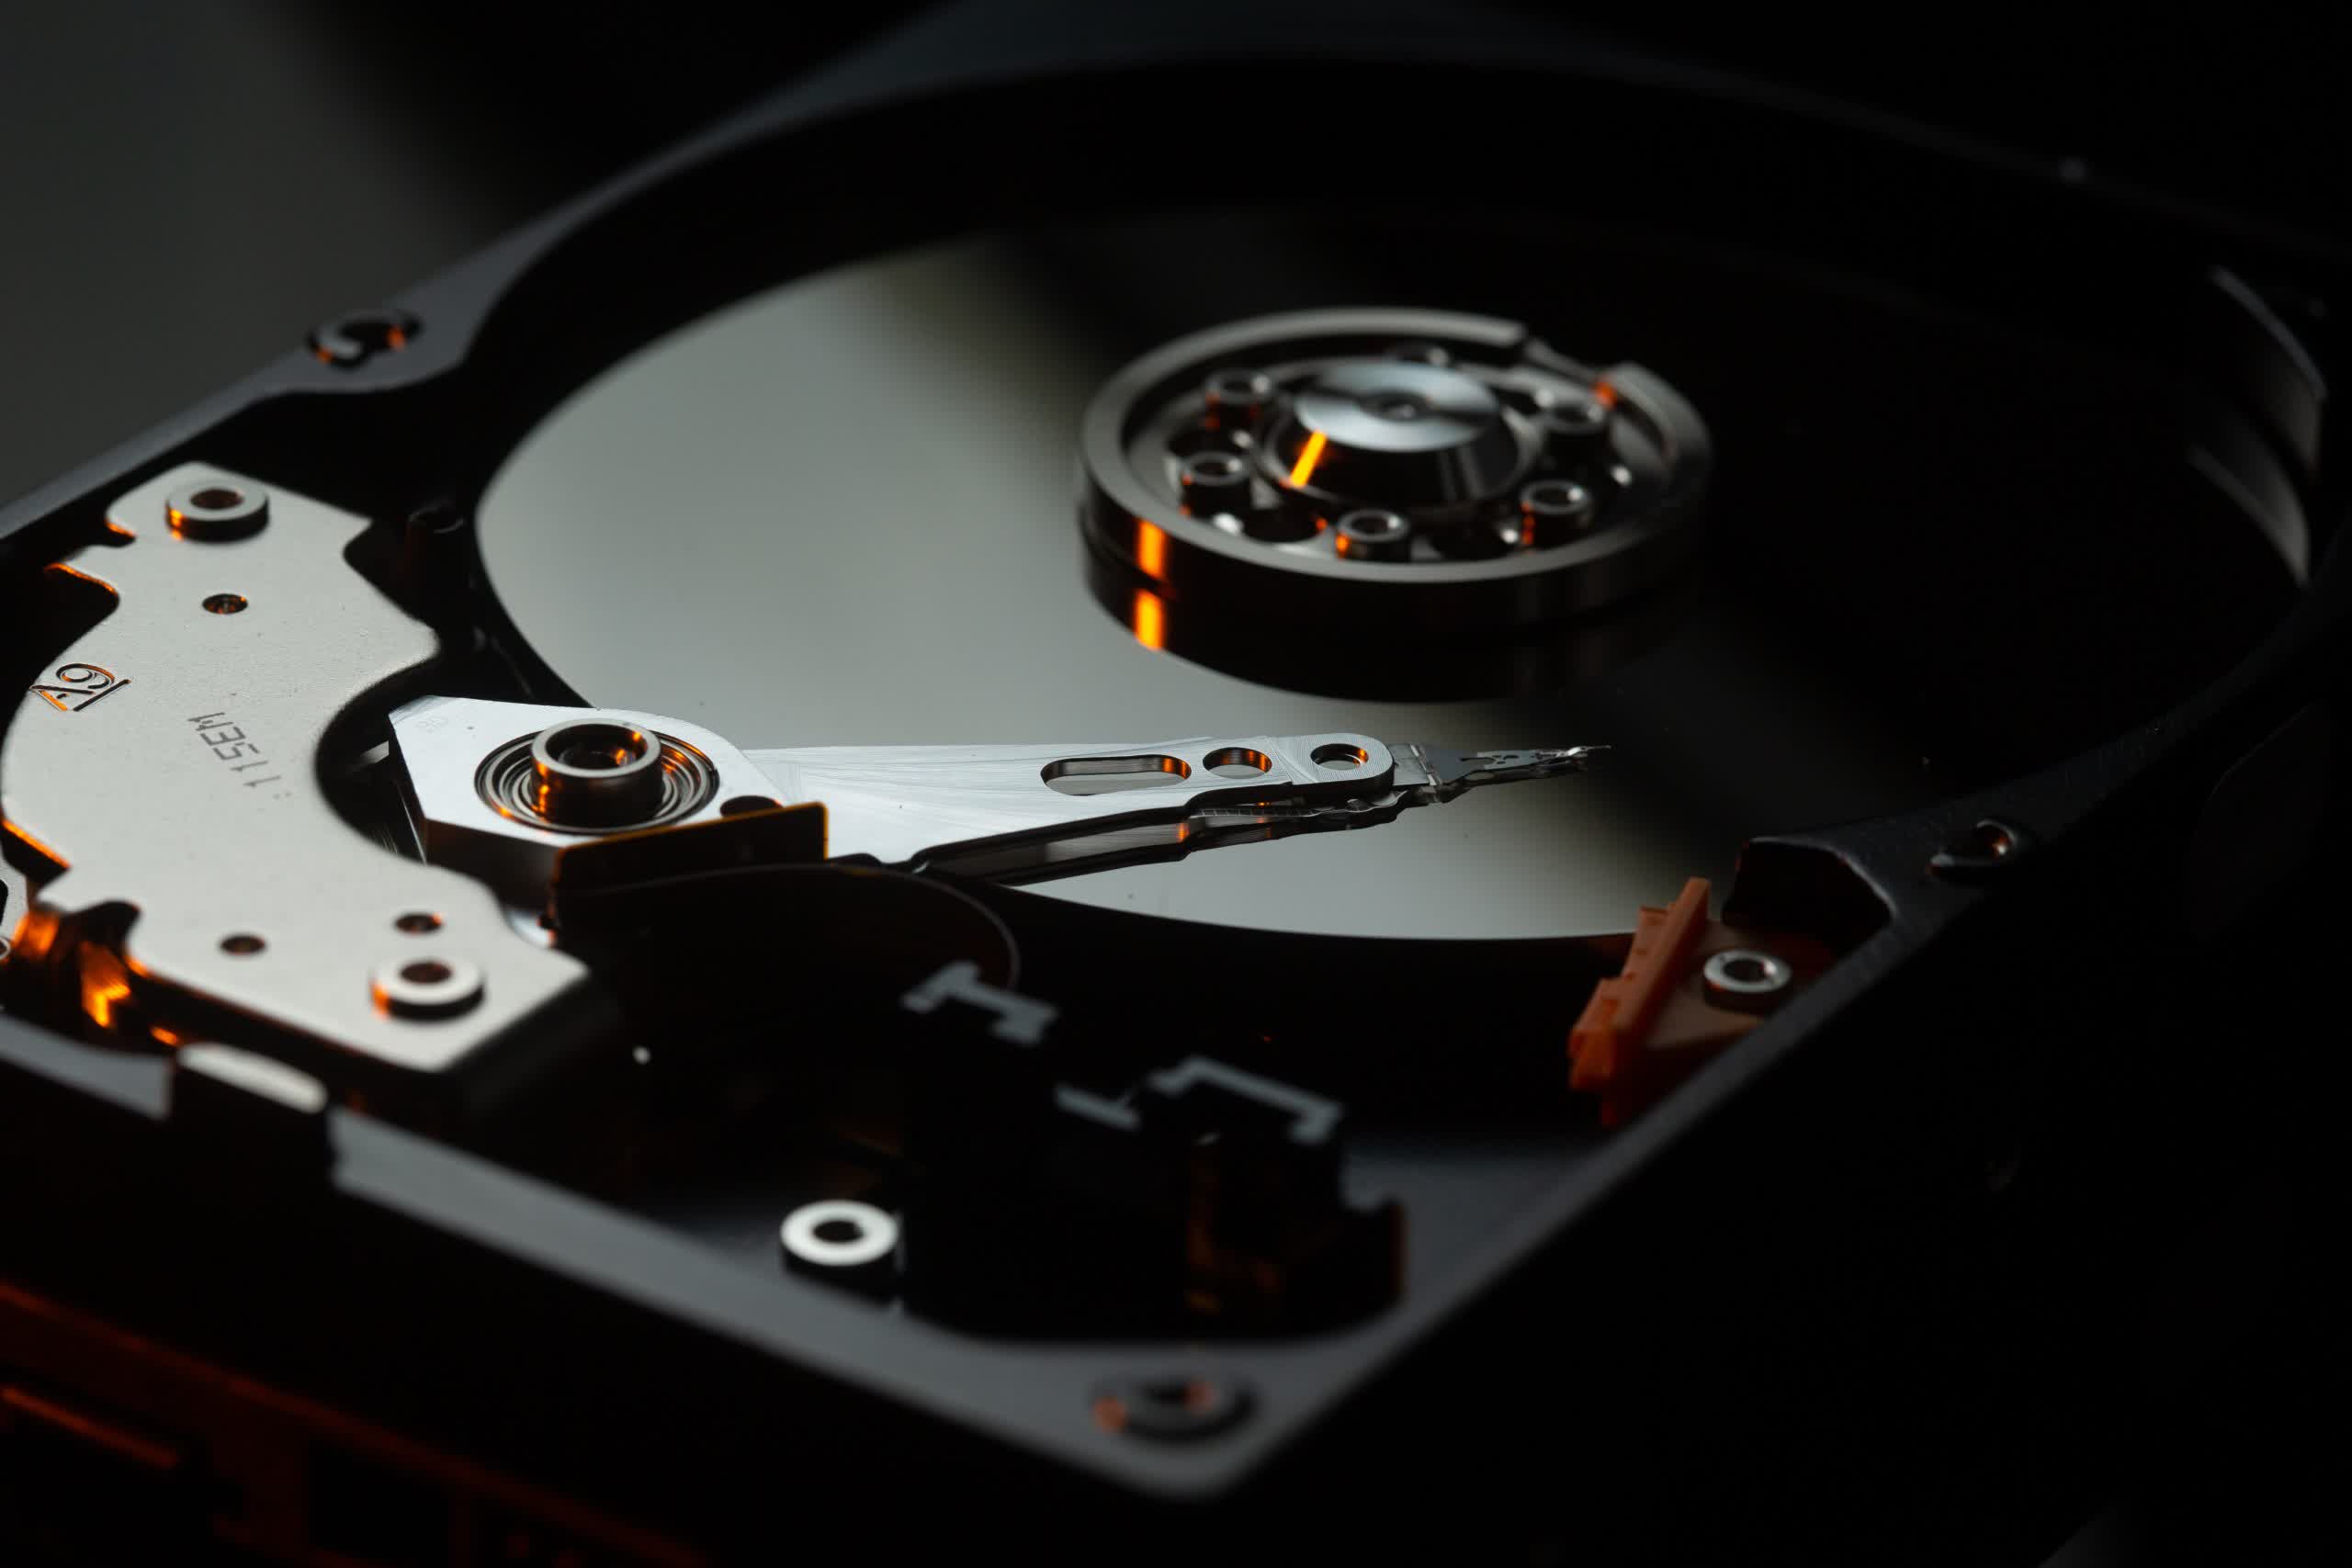 Hard drive shipments drop by a third year over year